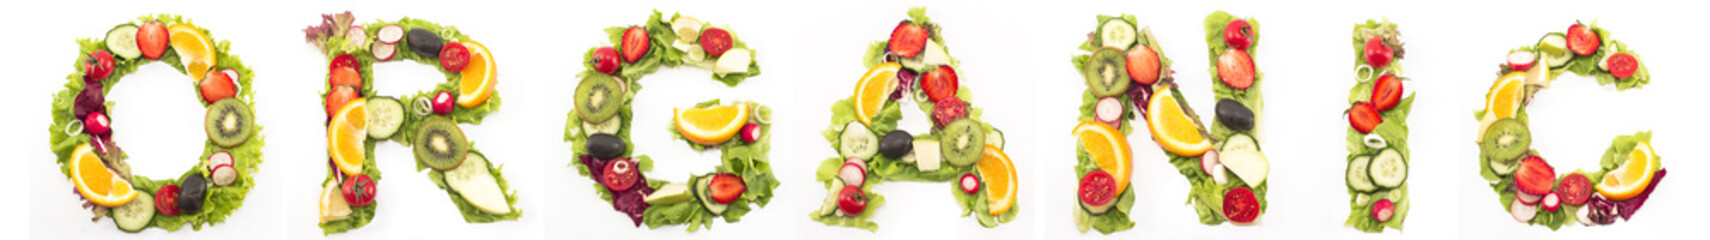 Word organic made of salad and fruits